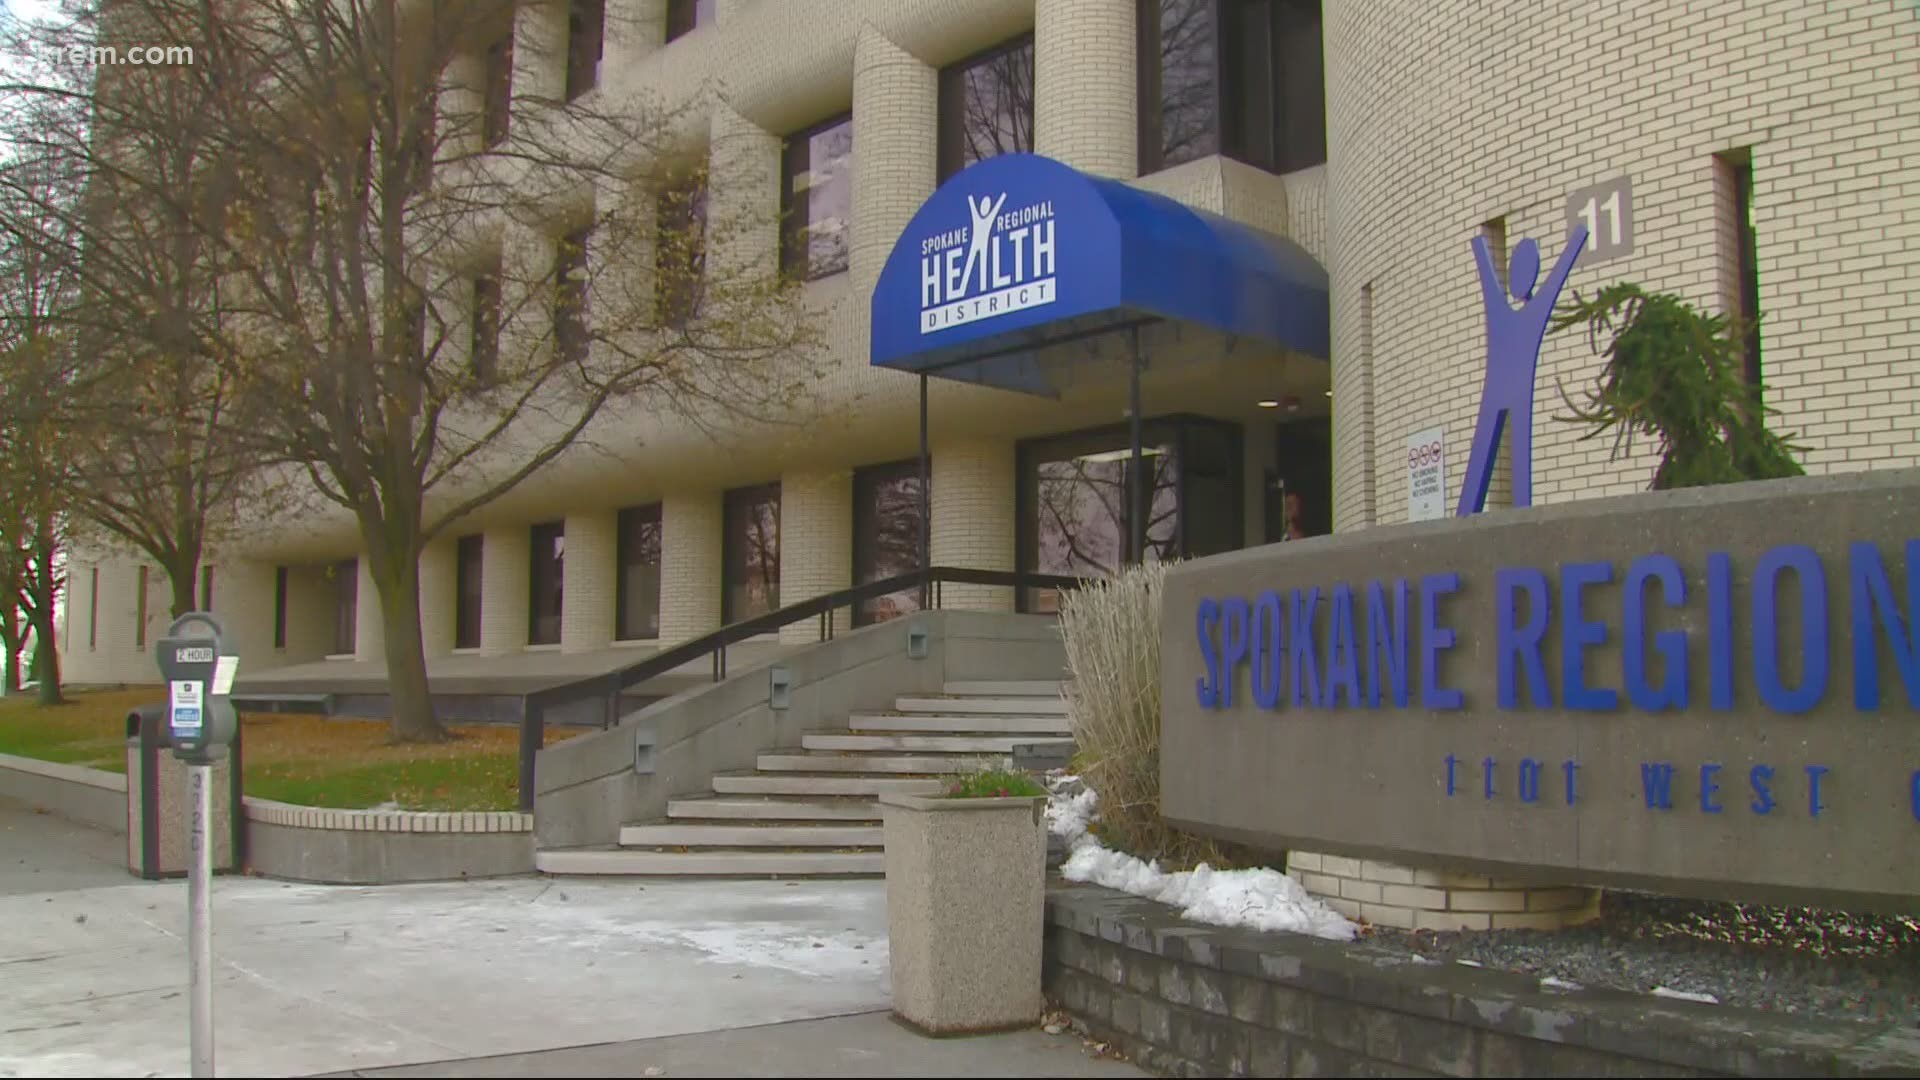 Providence hospitals in Spokane County are seeing their "highest volumes" of COVID-19 patients since the pandemic began, a representative said.